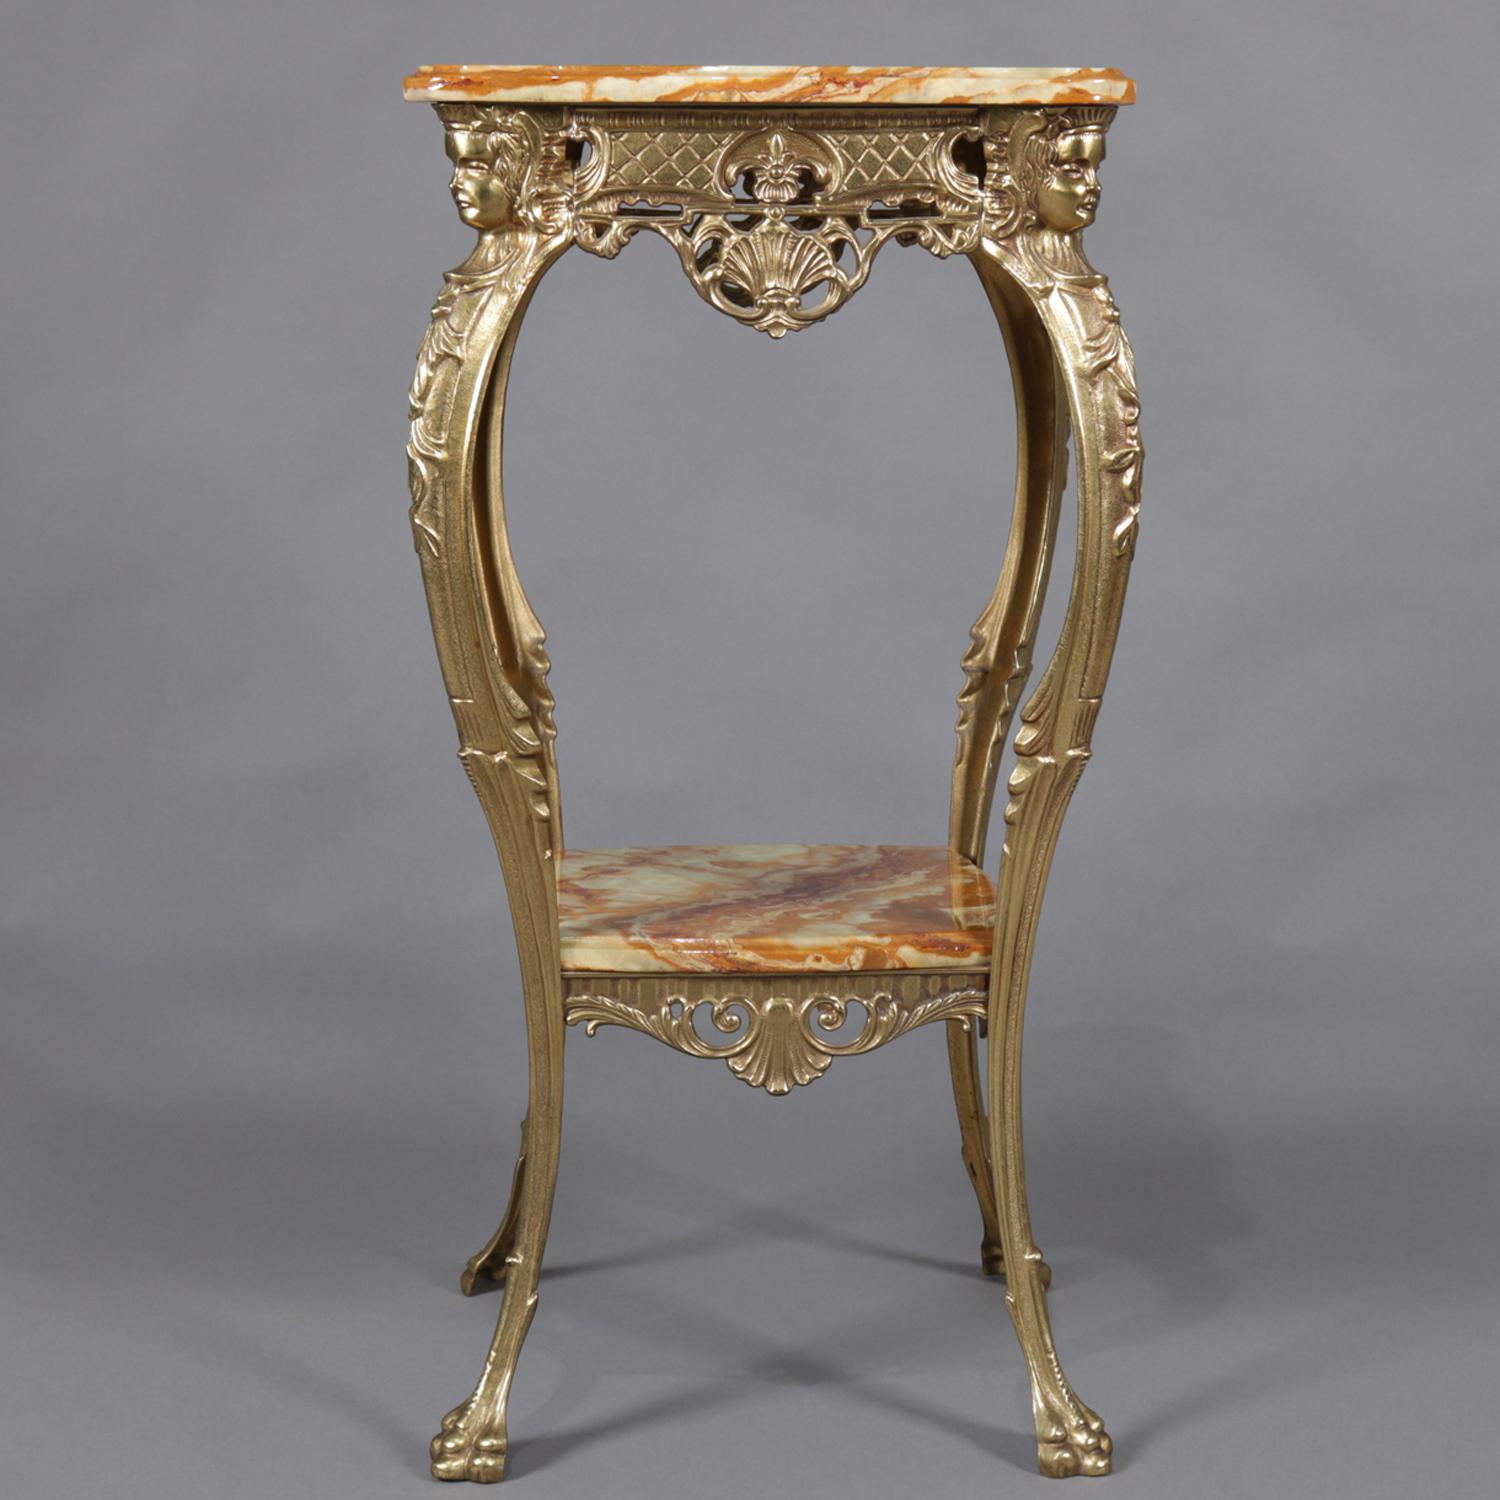 Antique French Egyptian Revival two-tiered plant stand features cast and gilt bronze frame with onyx top over pierced foliate and scroll apron, raised on cabriole legs surmounted by female masks and terminating in paw feet, lower onyx display shelf